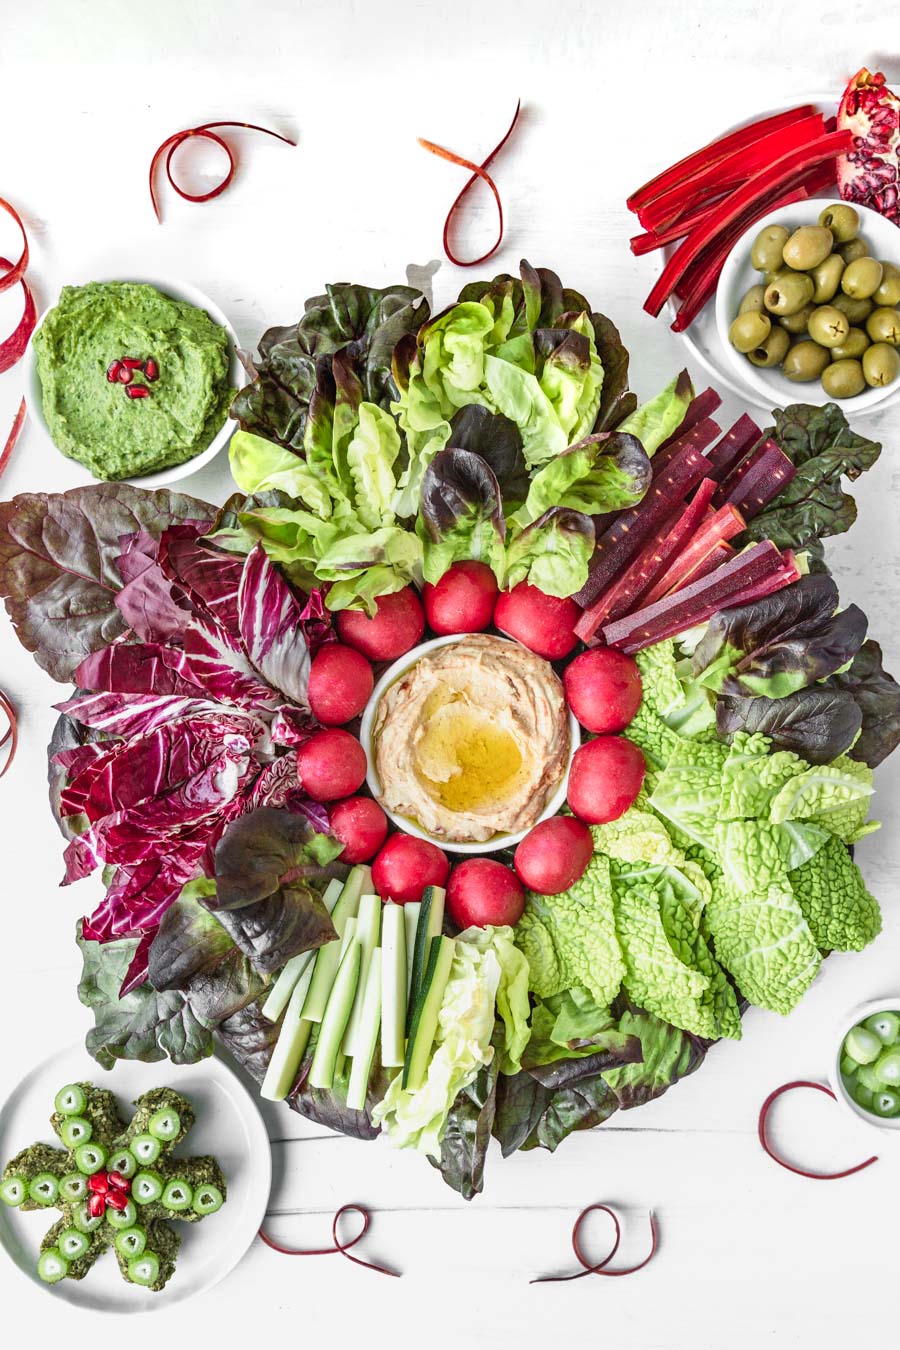 Easy Red &amp; Green Christmas Holiday Veggie Platter with Vegan Arugula-Pecan Cheesy Spread, Power Greens Guacamole, and Hummus. Recipes and photo by Kari of Beautiful Ingredient. #vegan #plantbased #crudite #veggieplatter #redandgreen #christmas #holiday #appetizer #veggies #cheeseboard #partytray